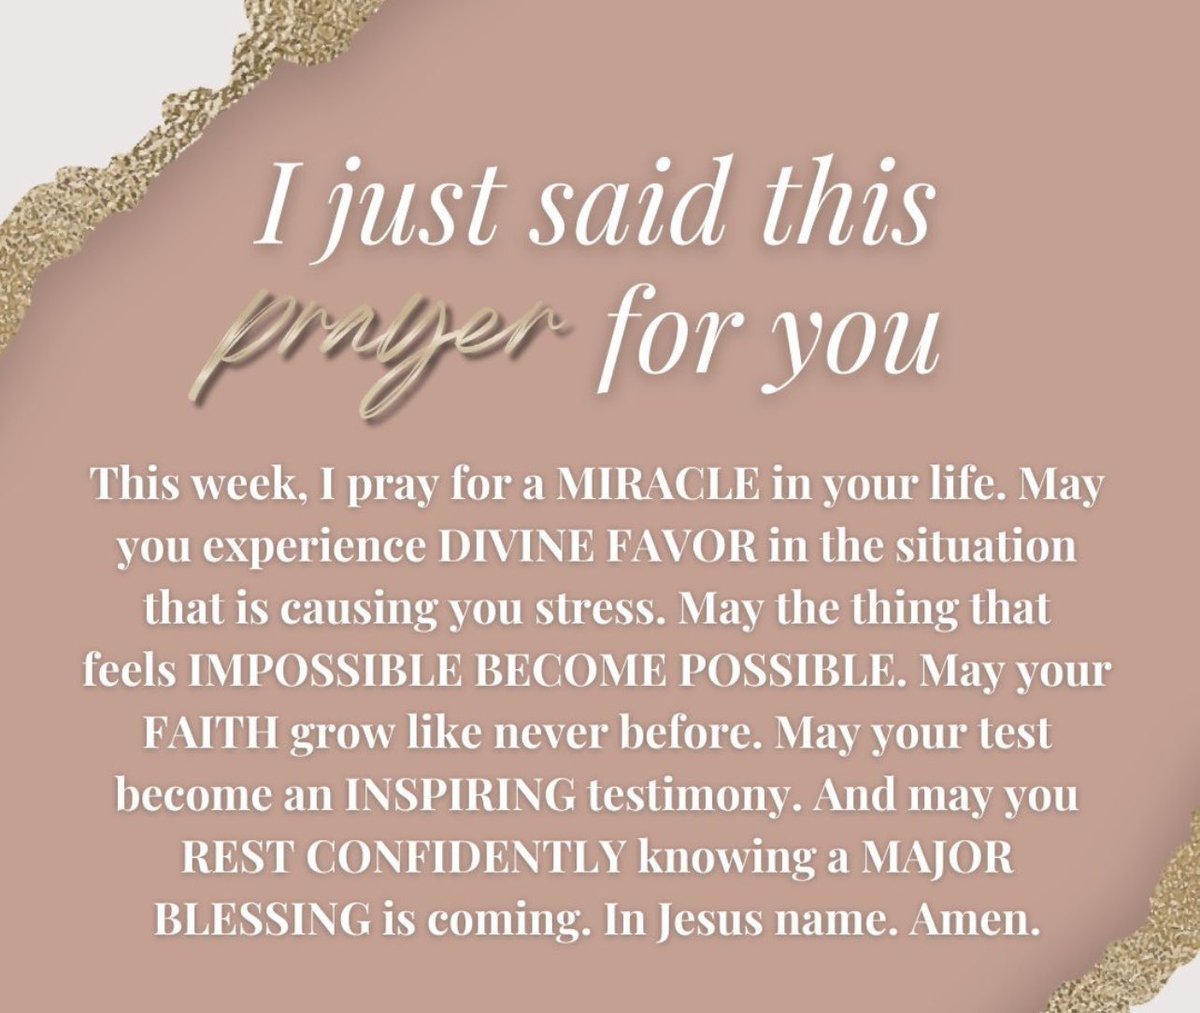 This is our week for MIRACLES and BLESSINGS!!